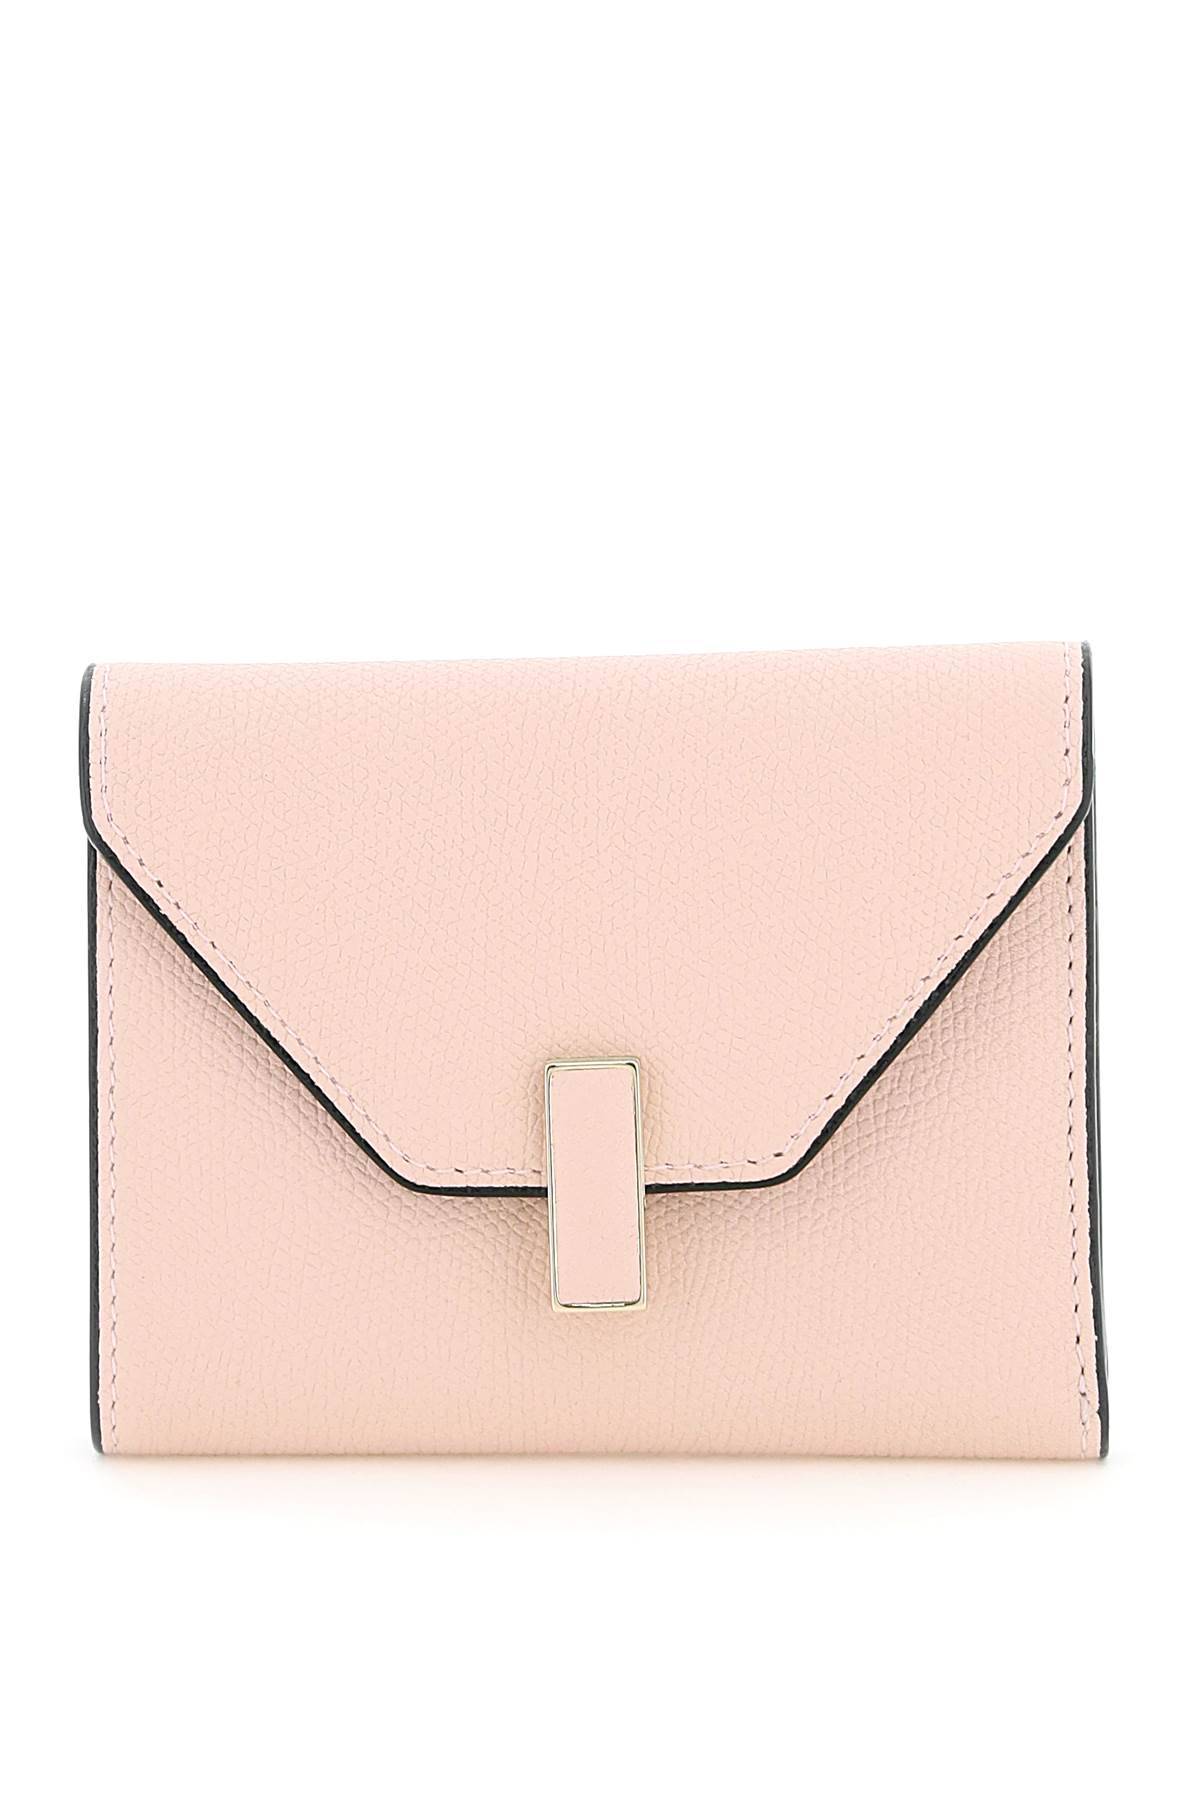 Valextra Iside Trifold Wallet In Pink